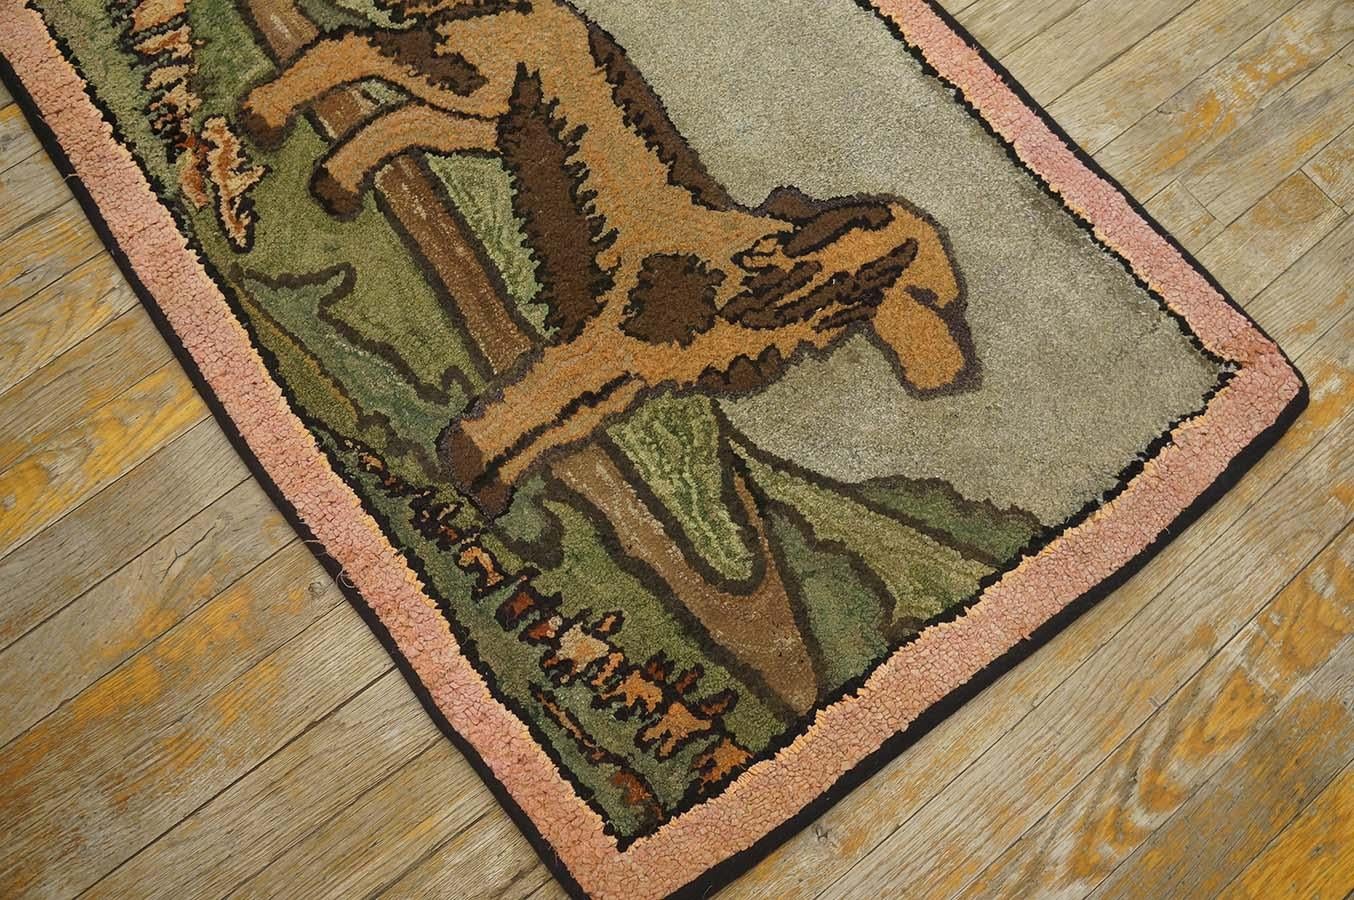 Mid-20th Century Mid 20th Century Pictorial American Hooked Rug ( 2' 3'' x 3' 3'' - 68 x 99 cm) For Sale